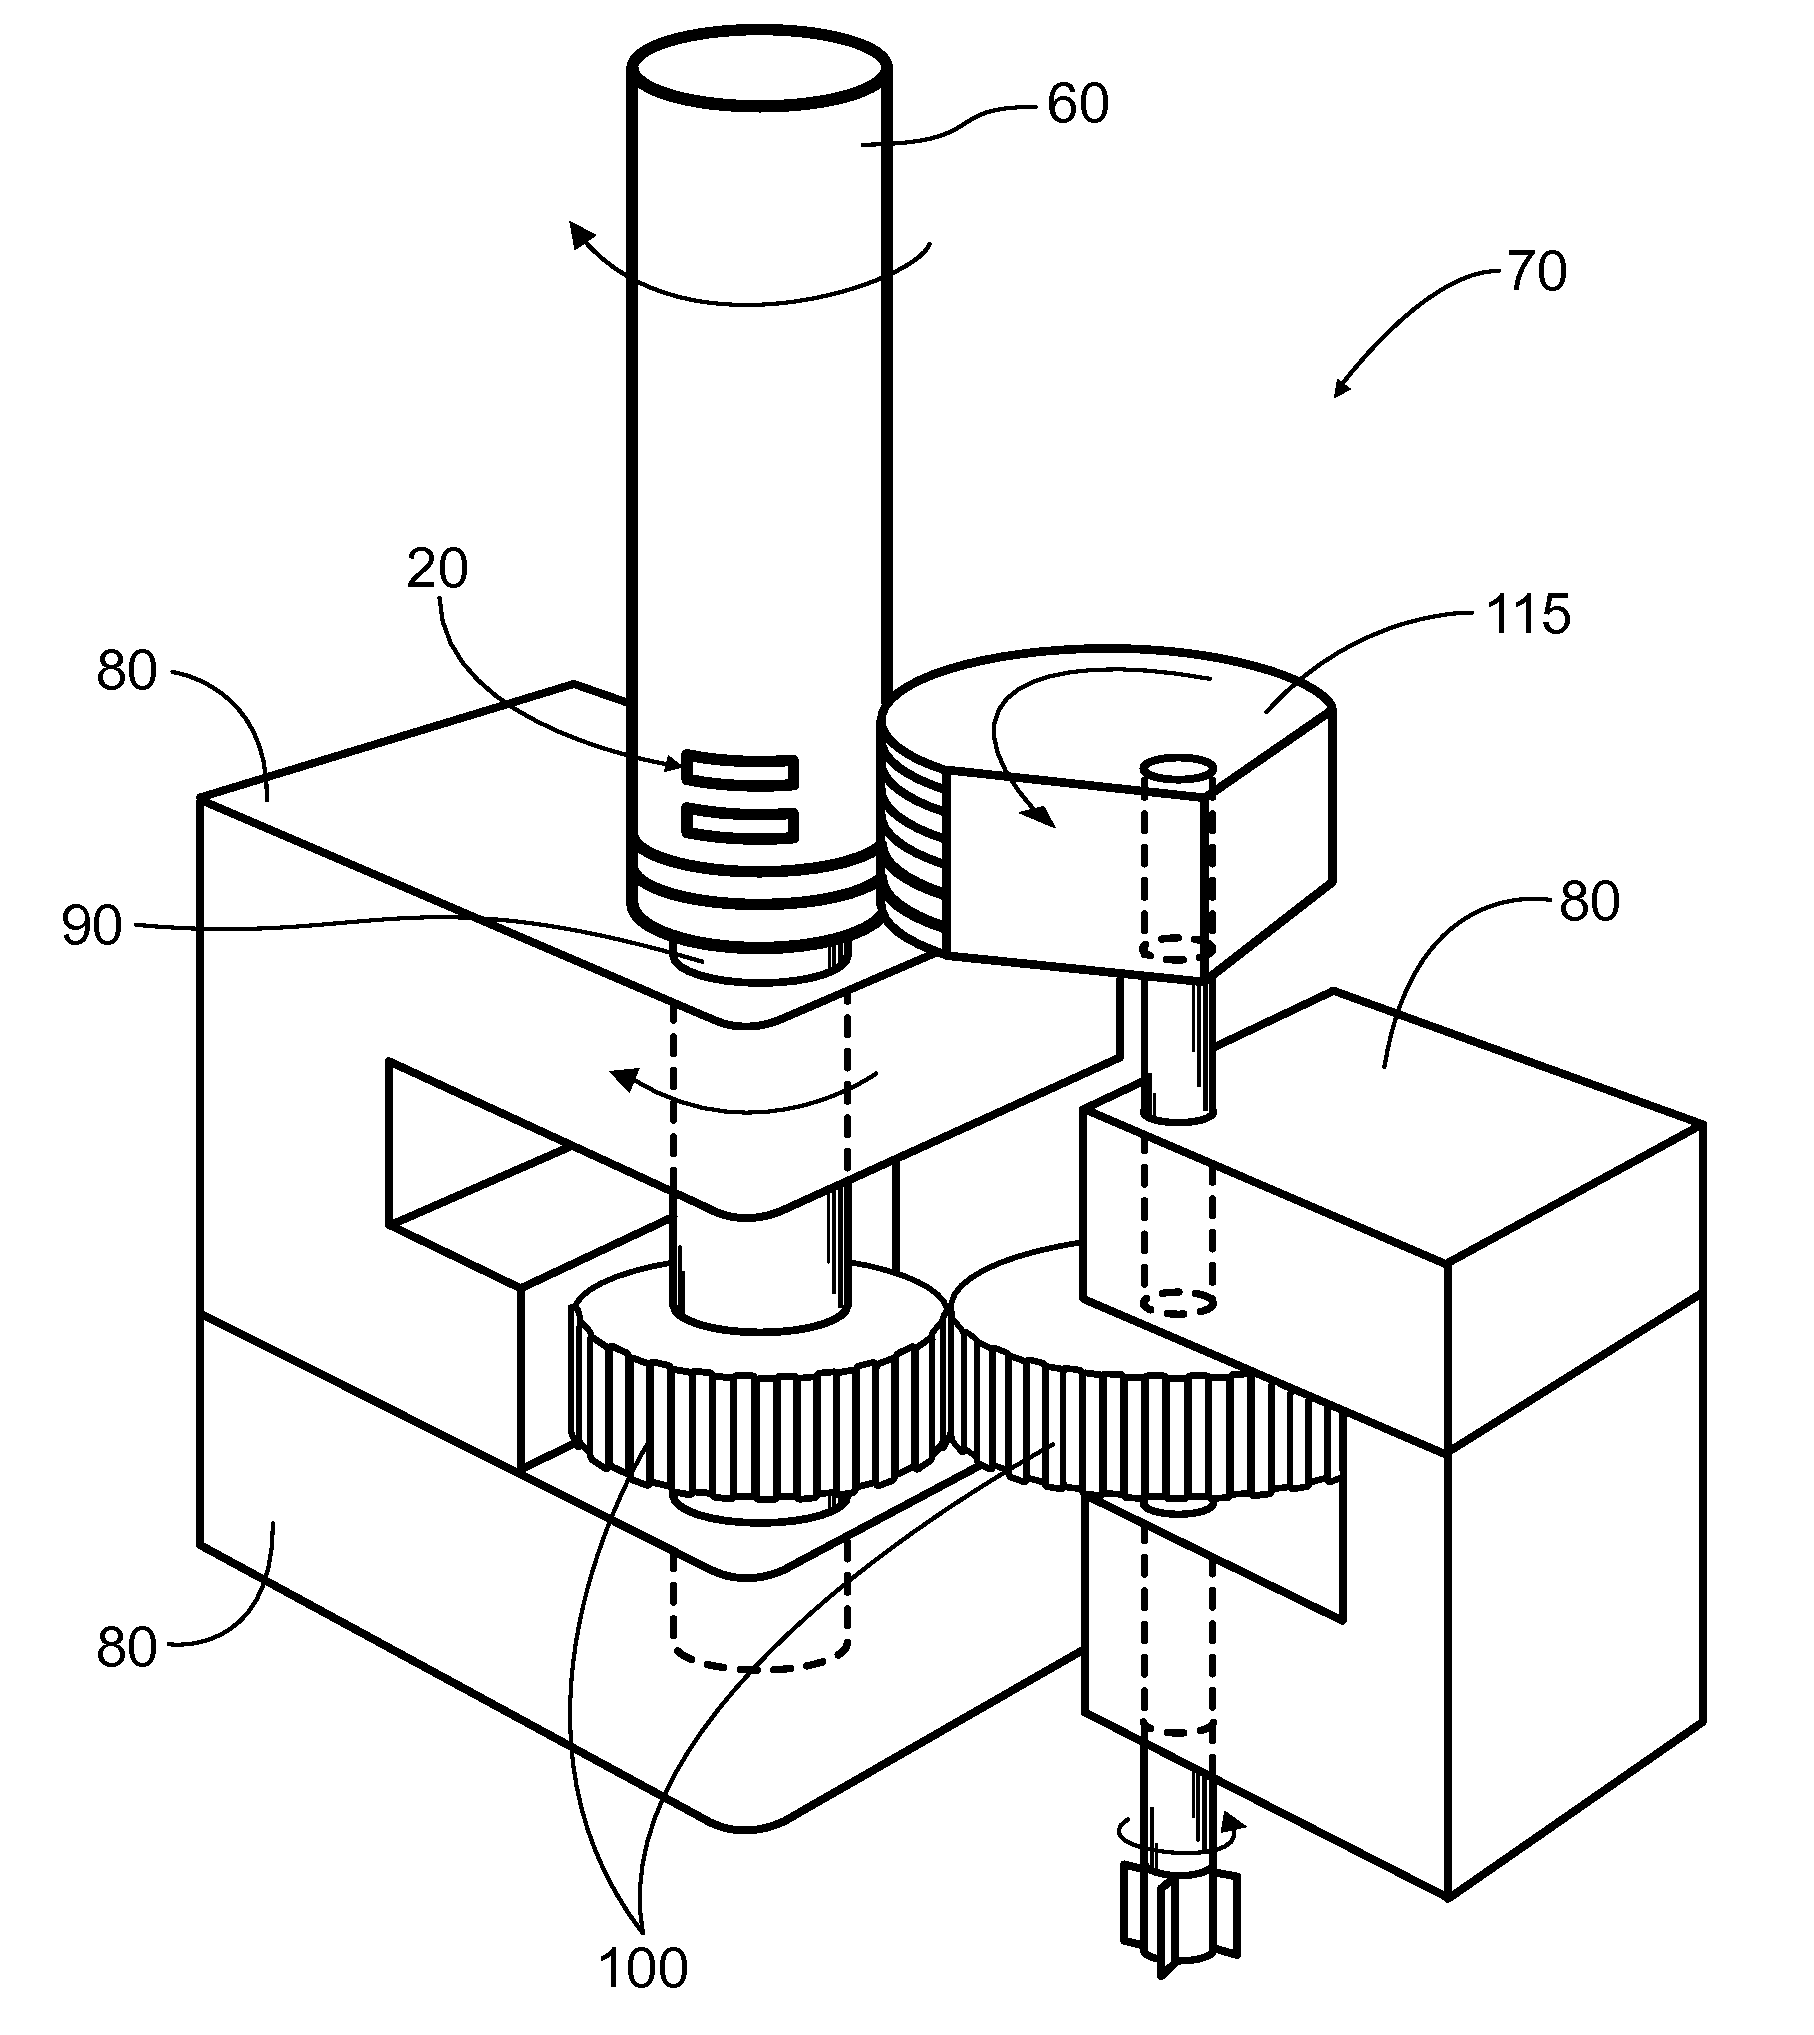 Rotary method for forming a vaginal applicator